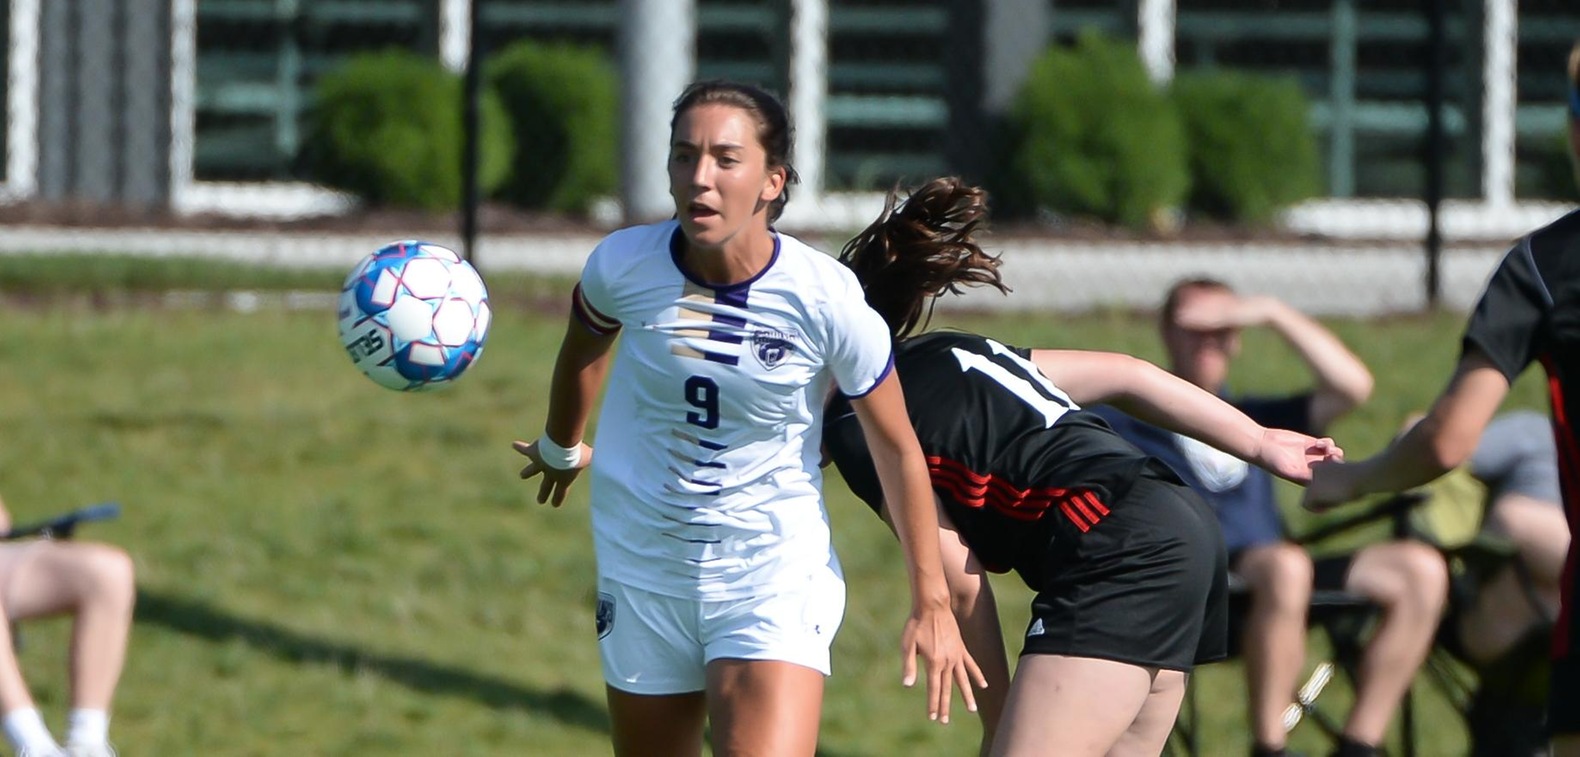 Courtney Wallingford's first goal of the season proved to be the game-winner on Saturday.